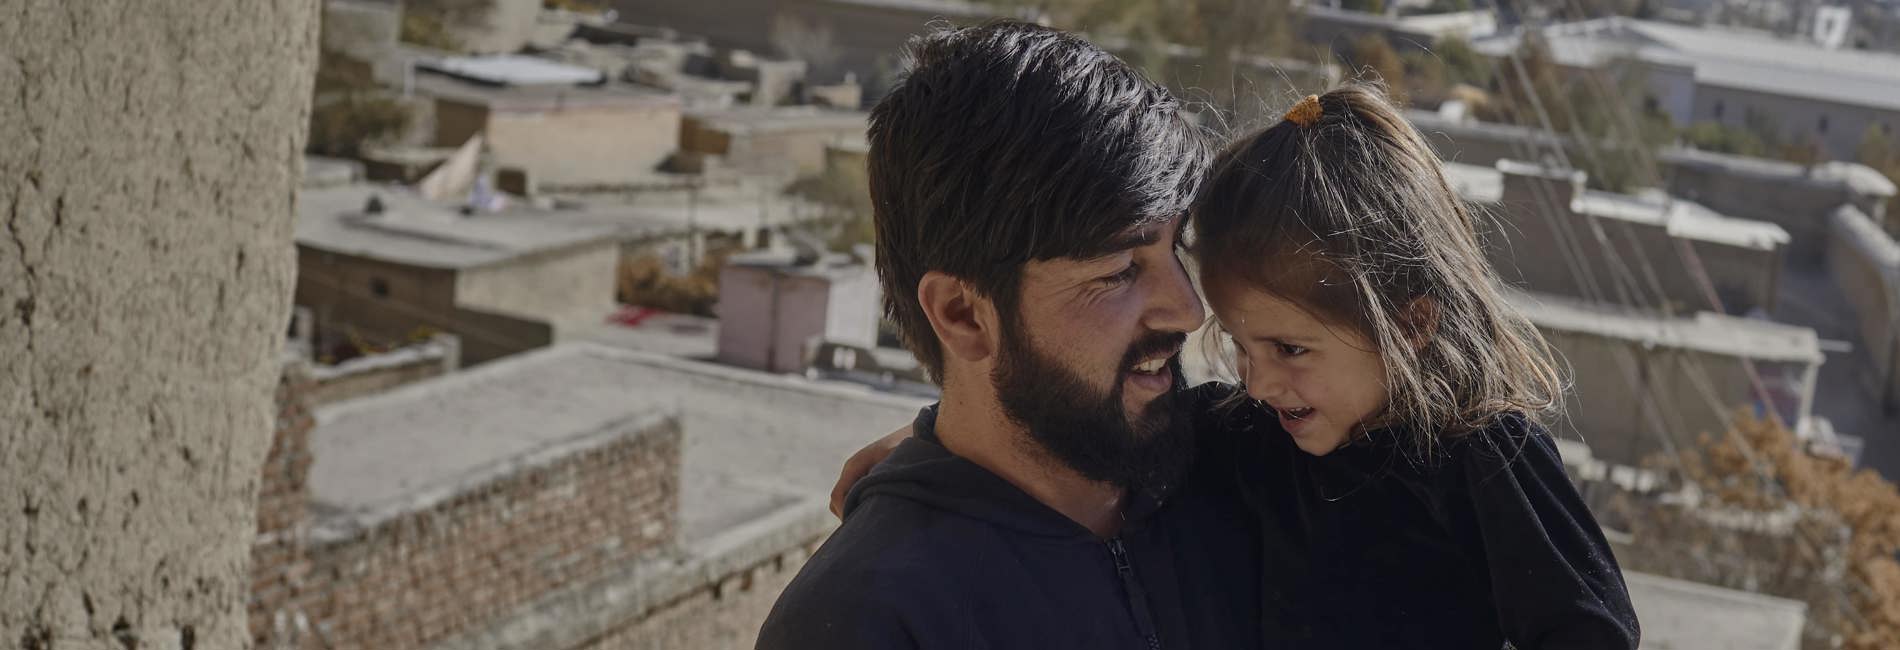 Abdul Sattar*, 30, holds his daughter Munawara, 4, outside their accommodation in Kabul.